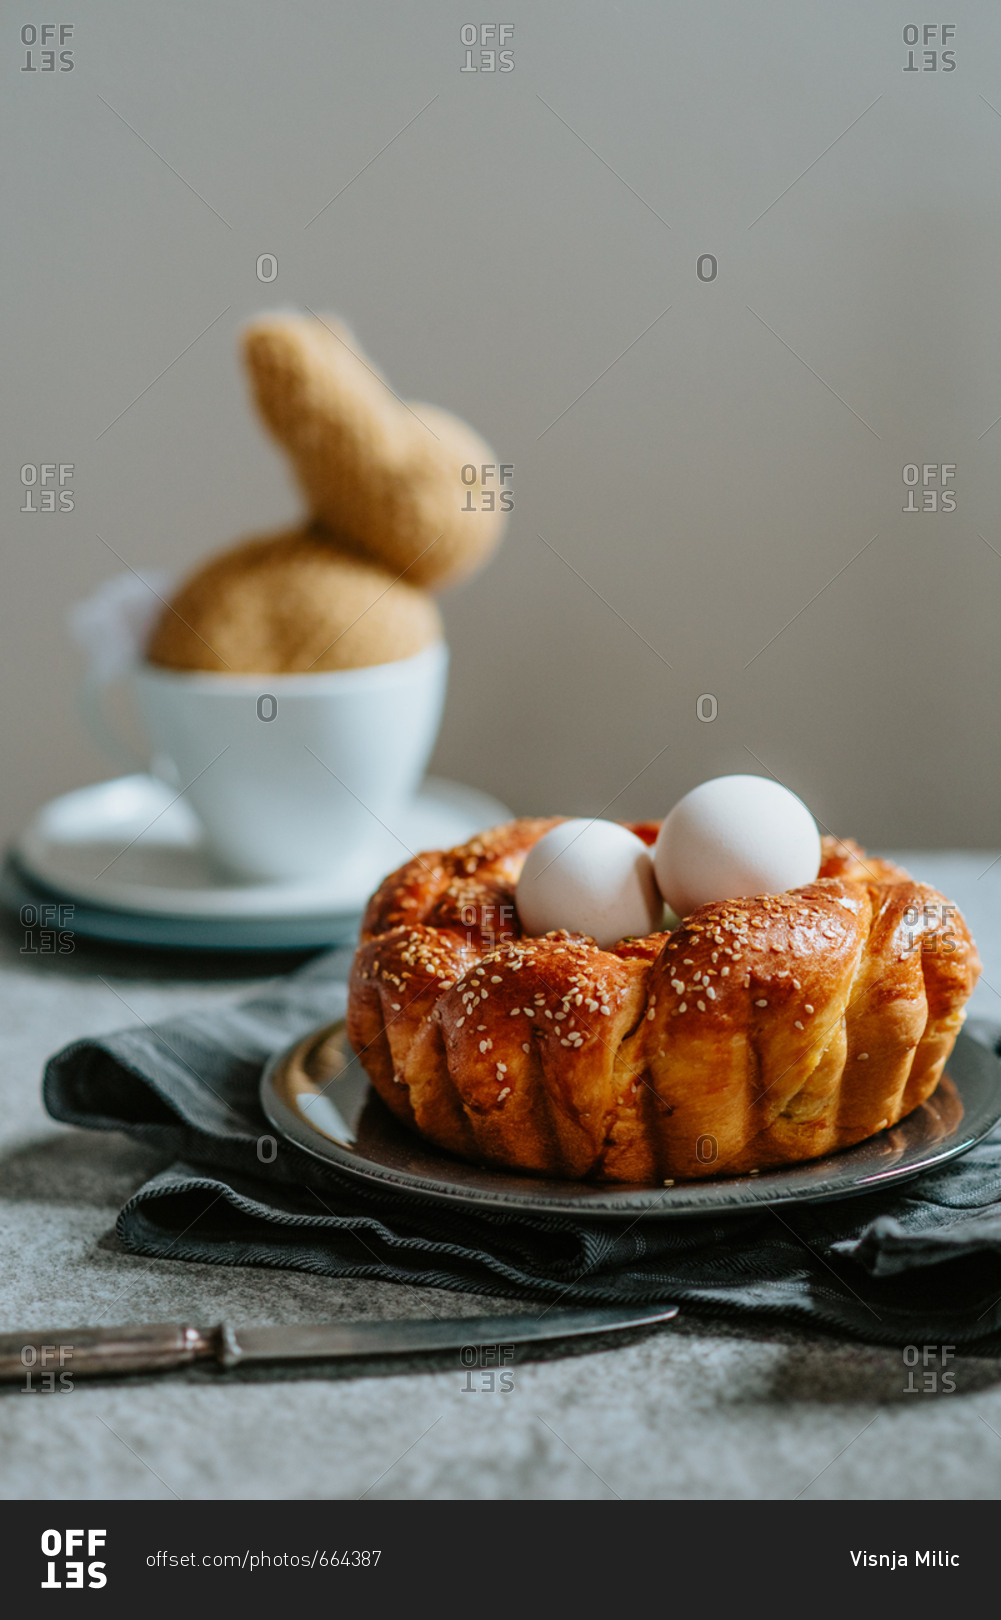 Easter braided nest like pastry with eggs inside and knitted bunny in the background